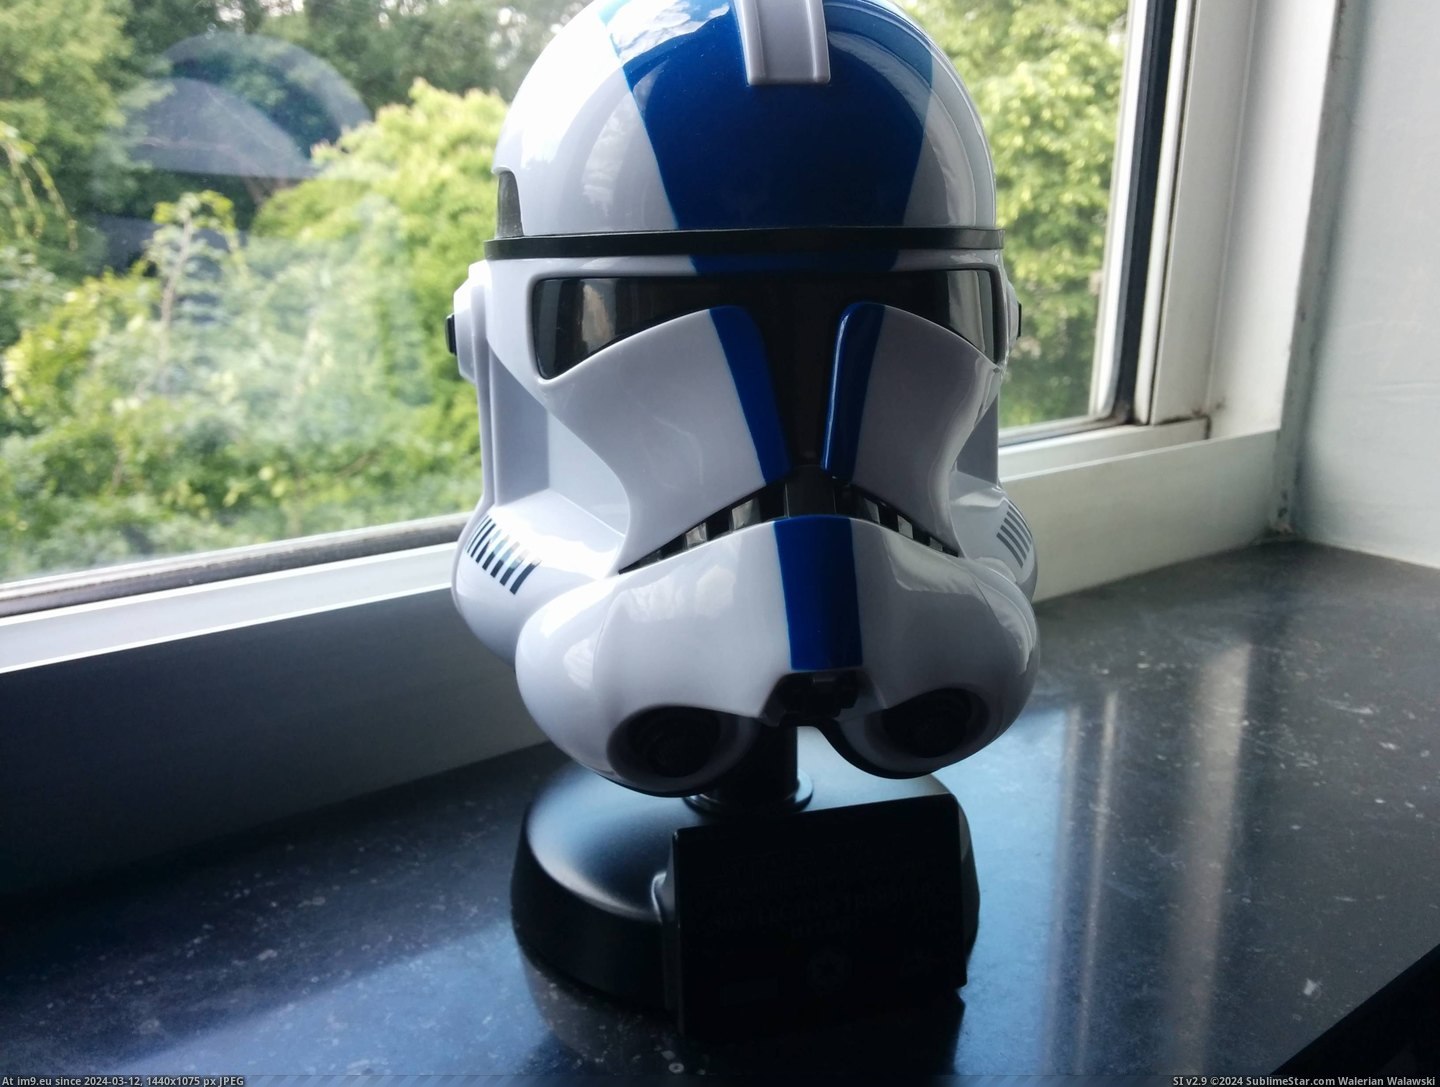 #Replica #Helmet #501st #Accurate [Mildlyinteresting] Today I found out even the inside of my 501st helmet replica is accurate. 1 Pic. (Image of album My r/MILDLYINTERESTING favs))